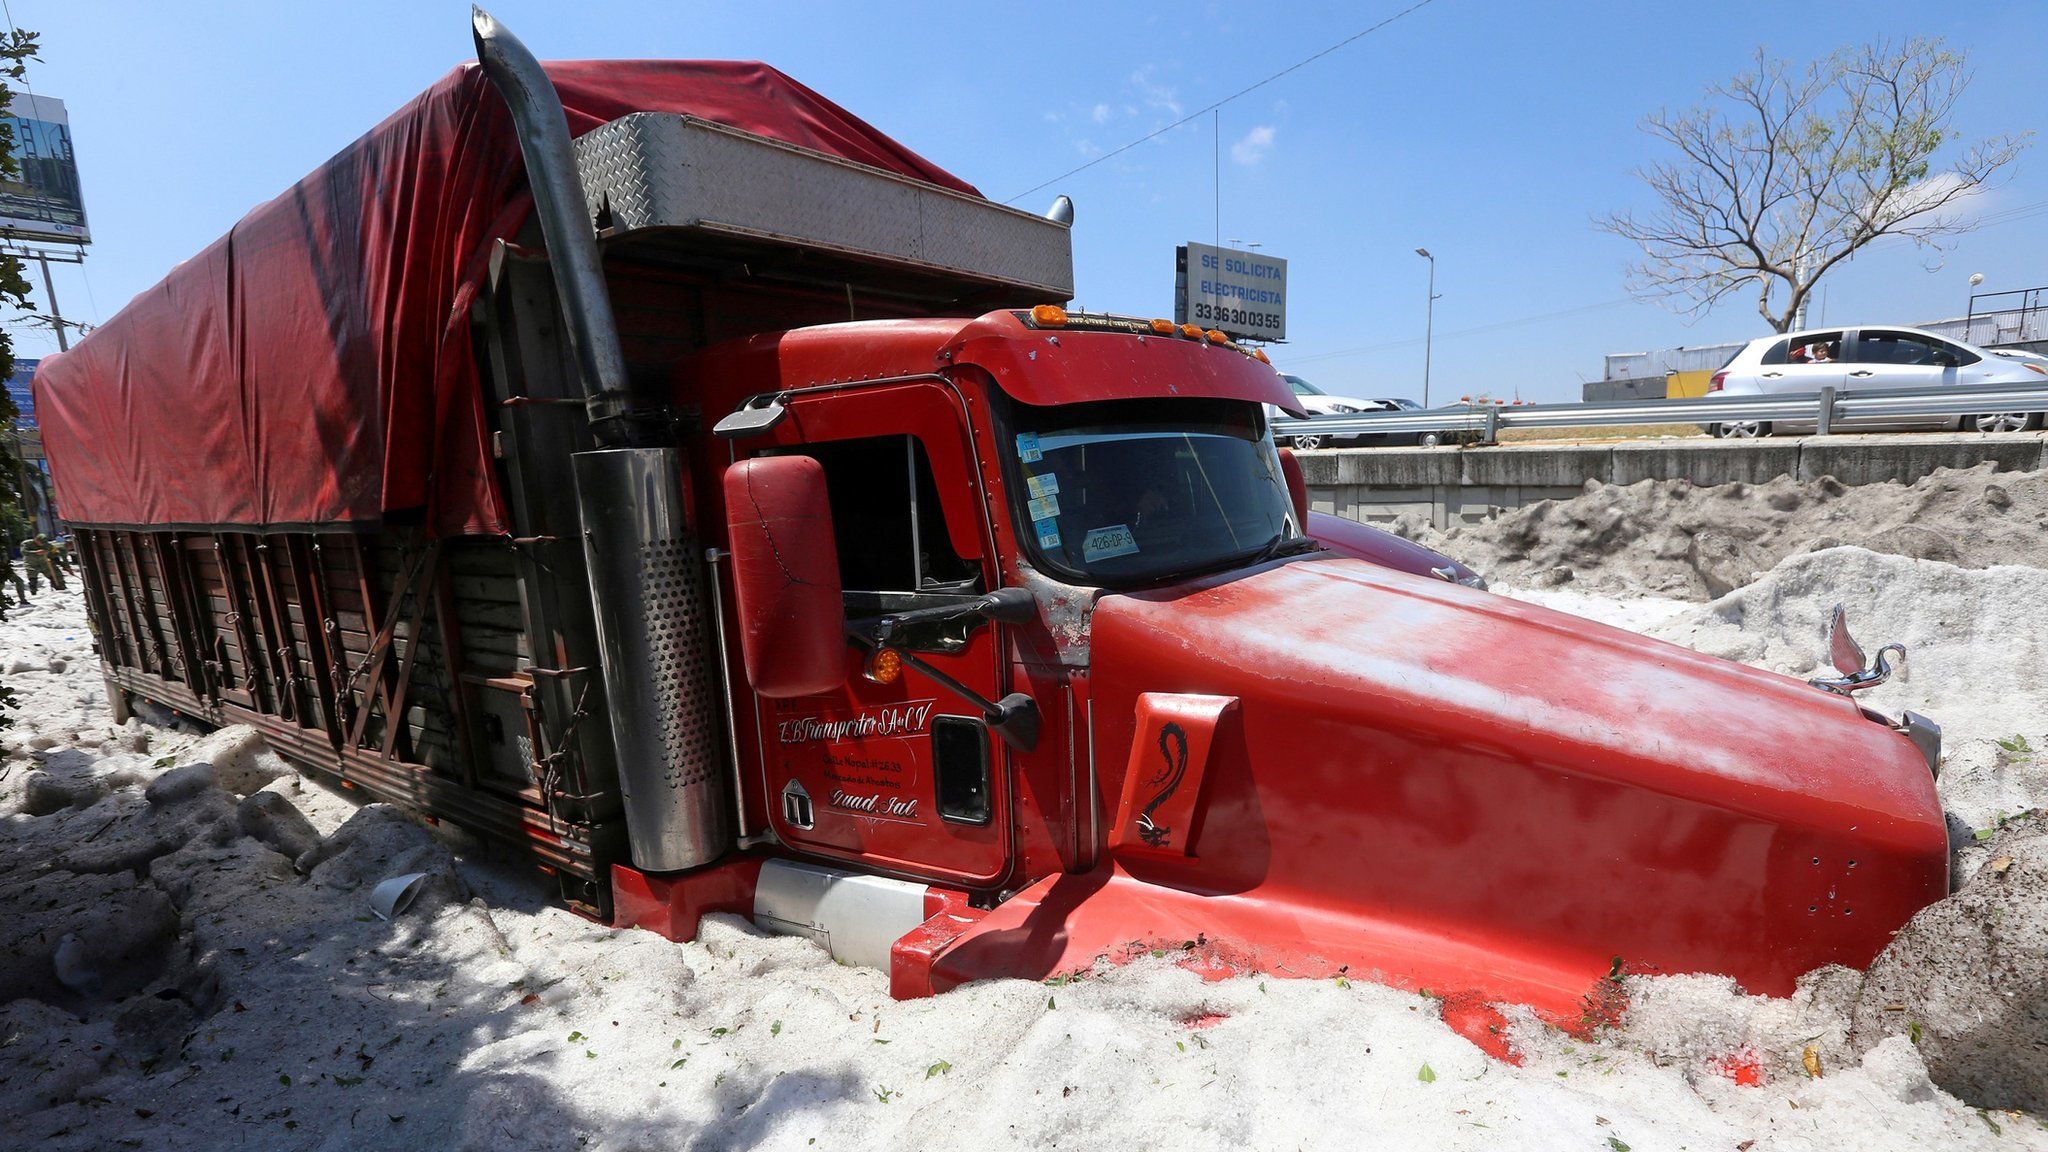 A truck is buried in ice after a heavy storm of rain and hail which affected some areas of the city Guadalajara